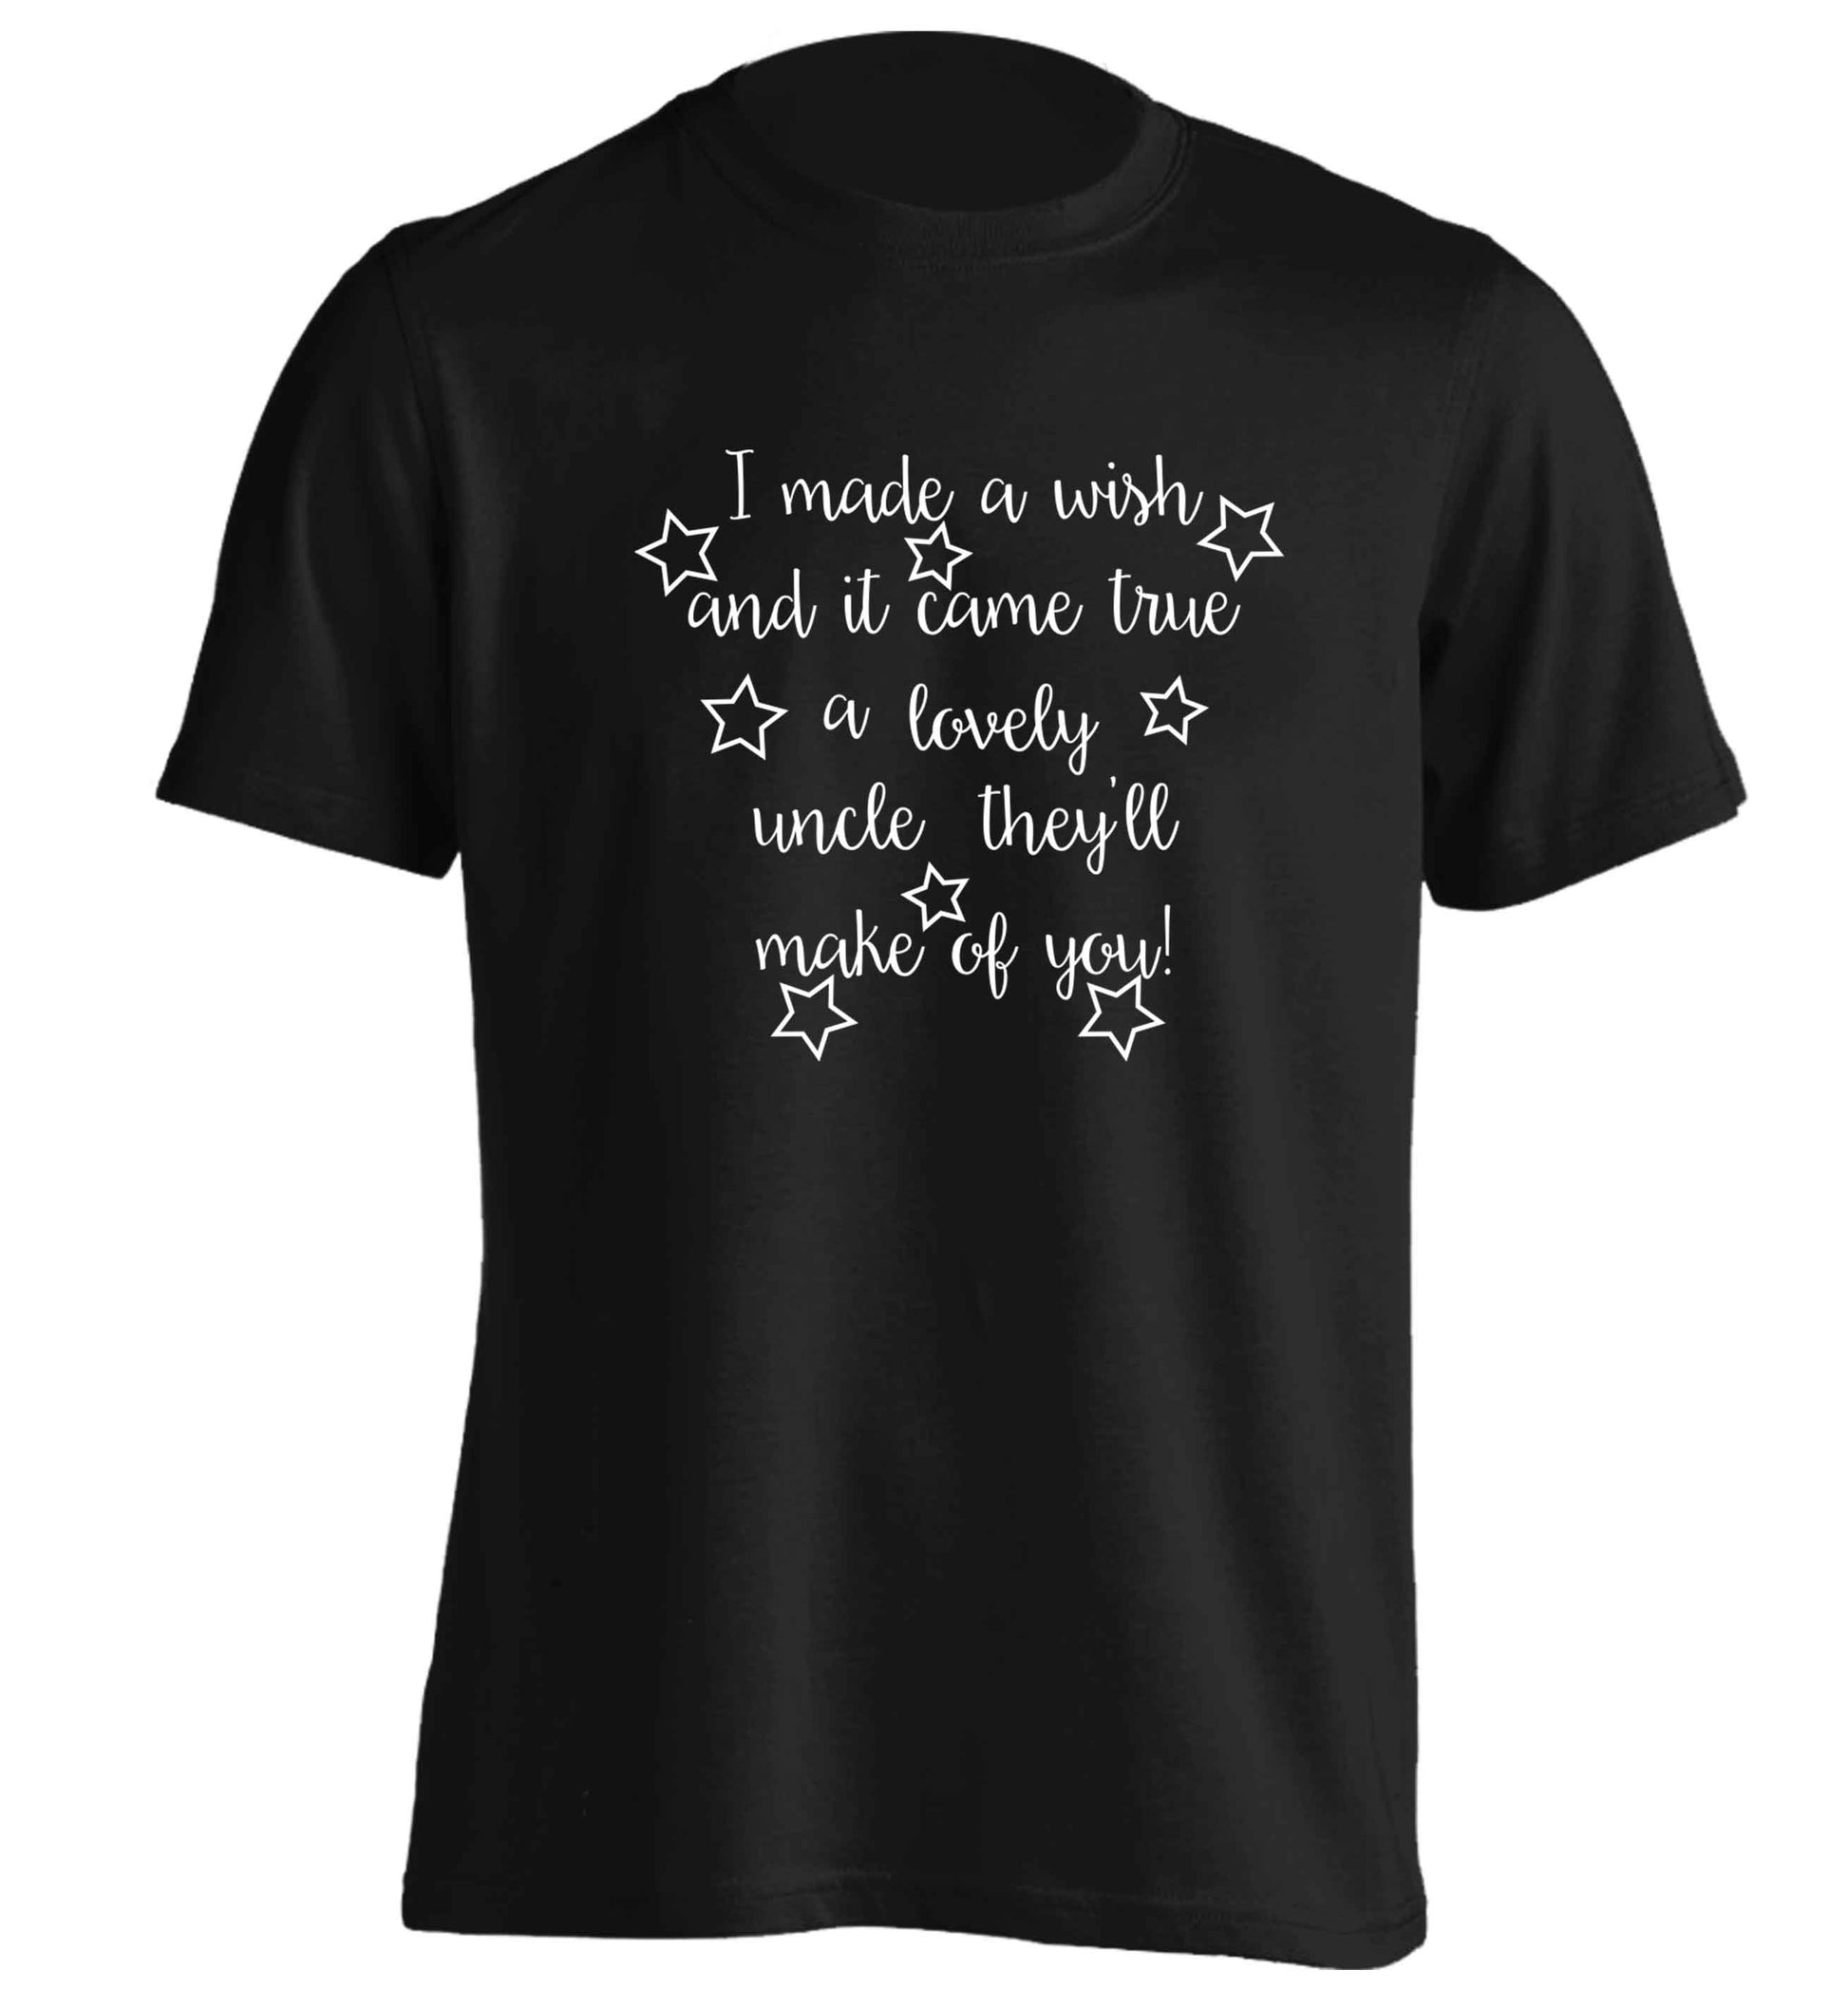 I made a wish and it came true a lovely uncle they'll make of you! adults unisex black Tshirt 2XL